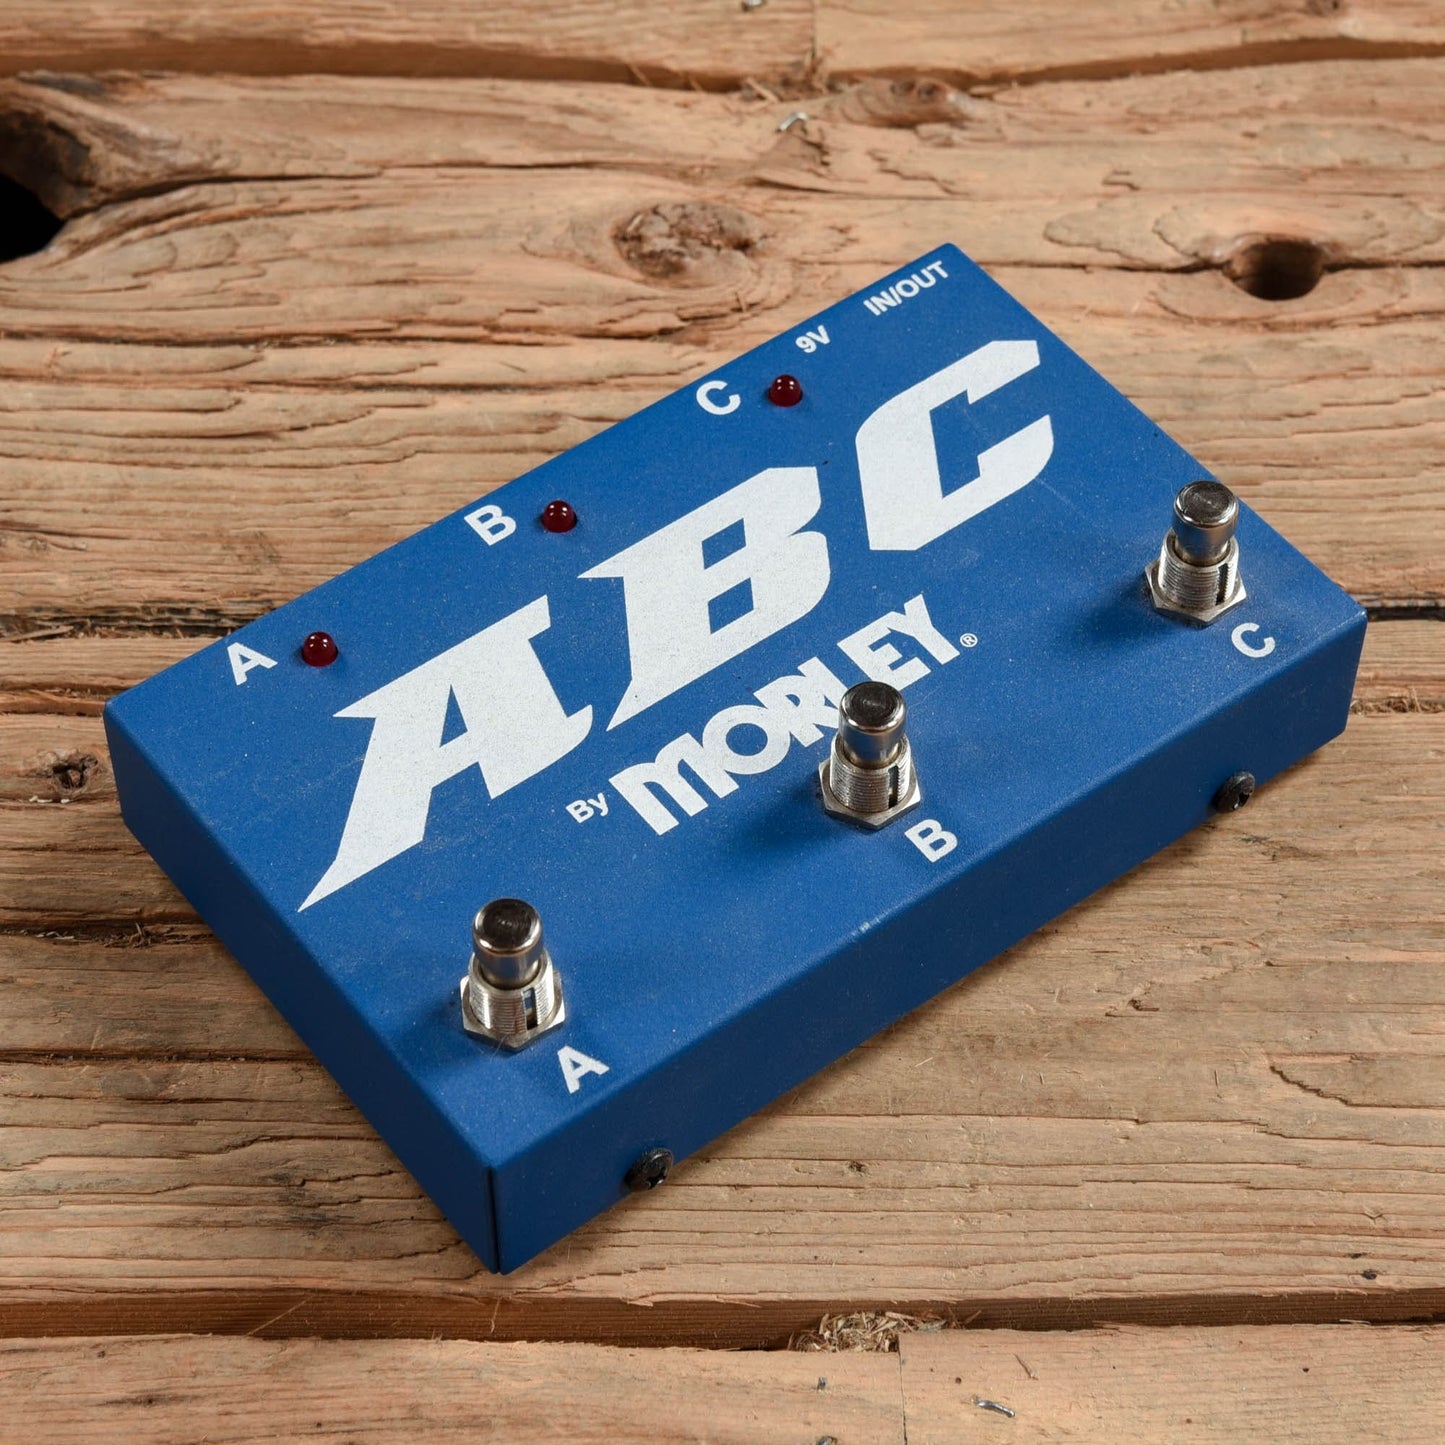 Morley ABC Selector Effects and Pedals / Controllers, Volume and Expression